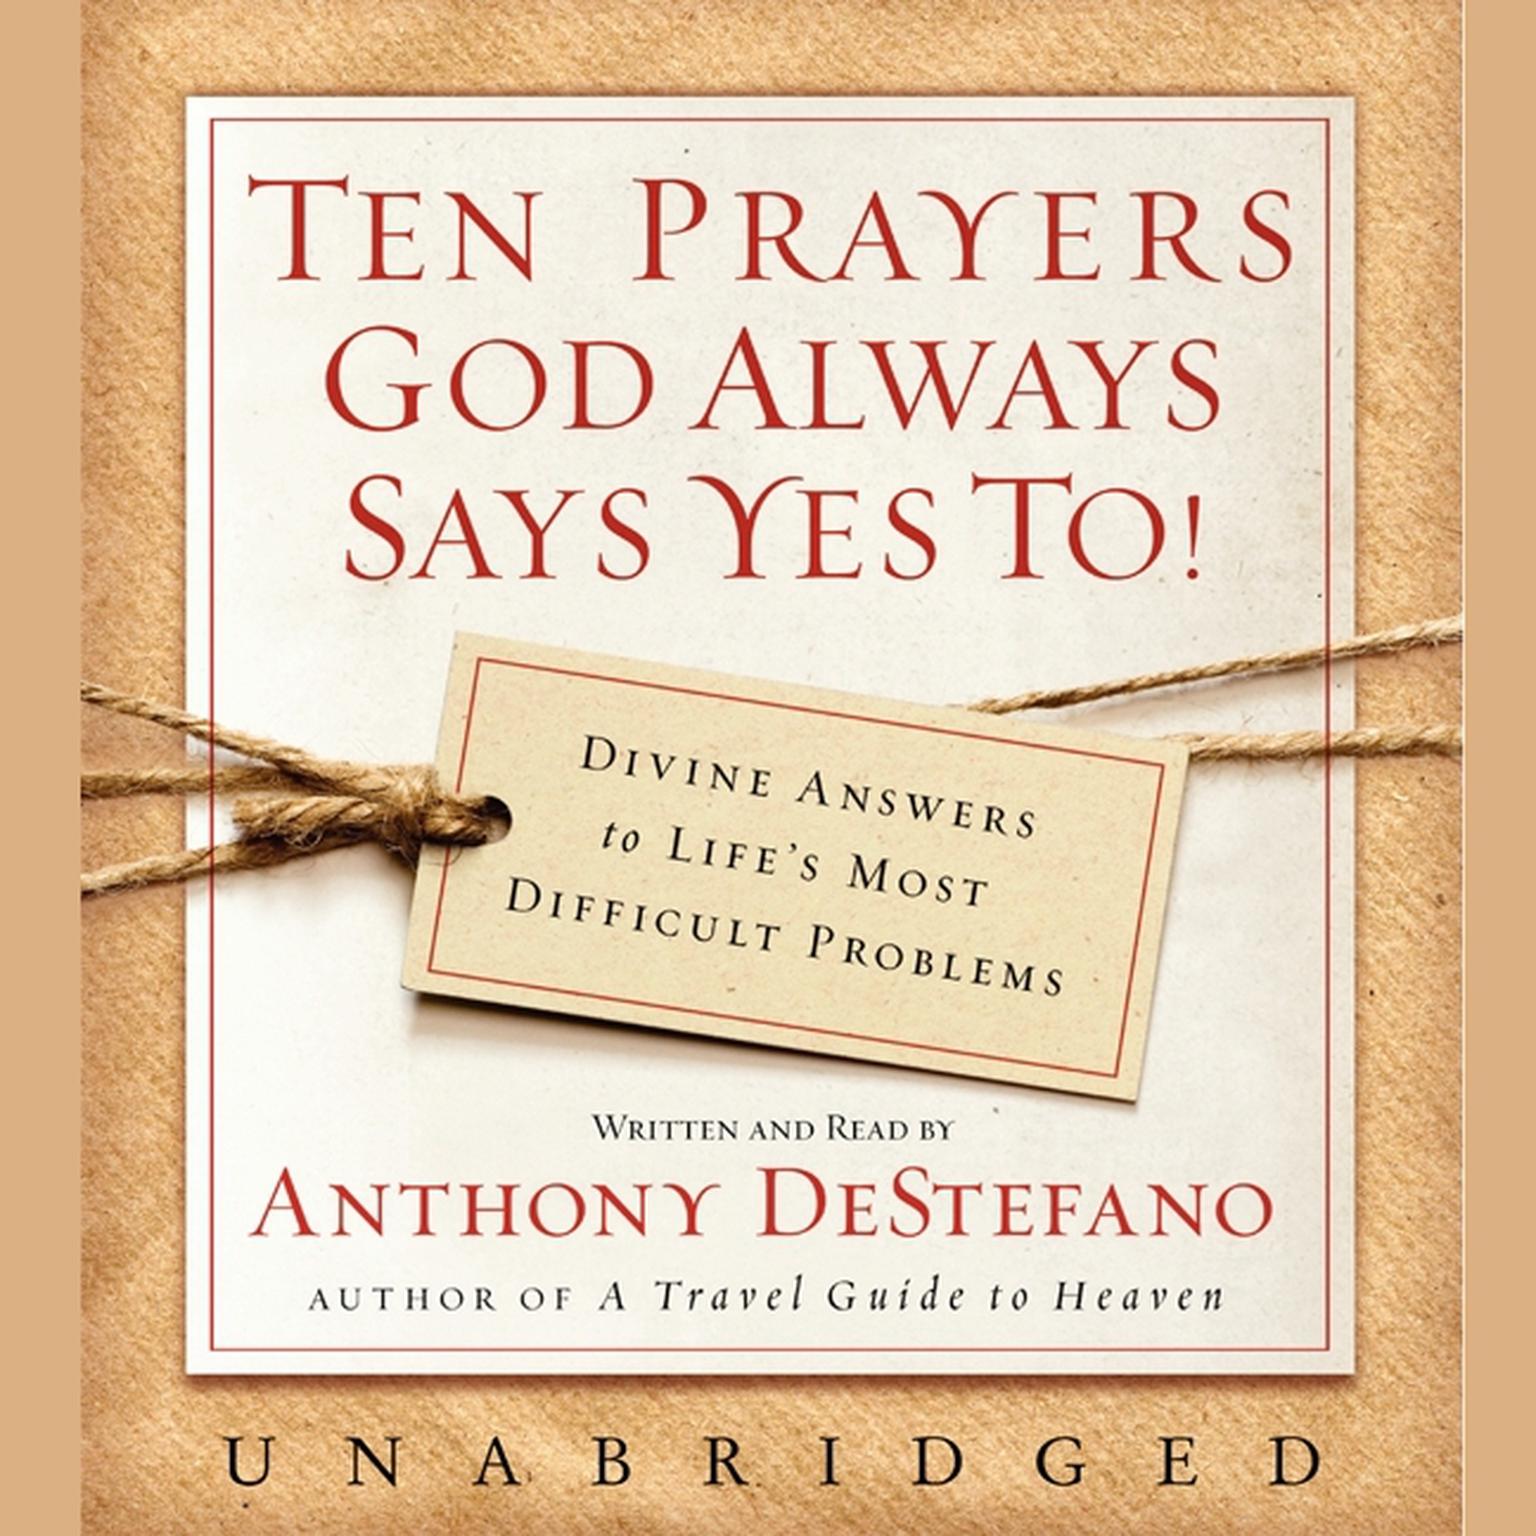 Ten Prayers God Always Says Yes To UNA: Divine Answers to Life’s Most Difficult Problems Audiobook, by Anthony DeStefano